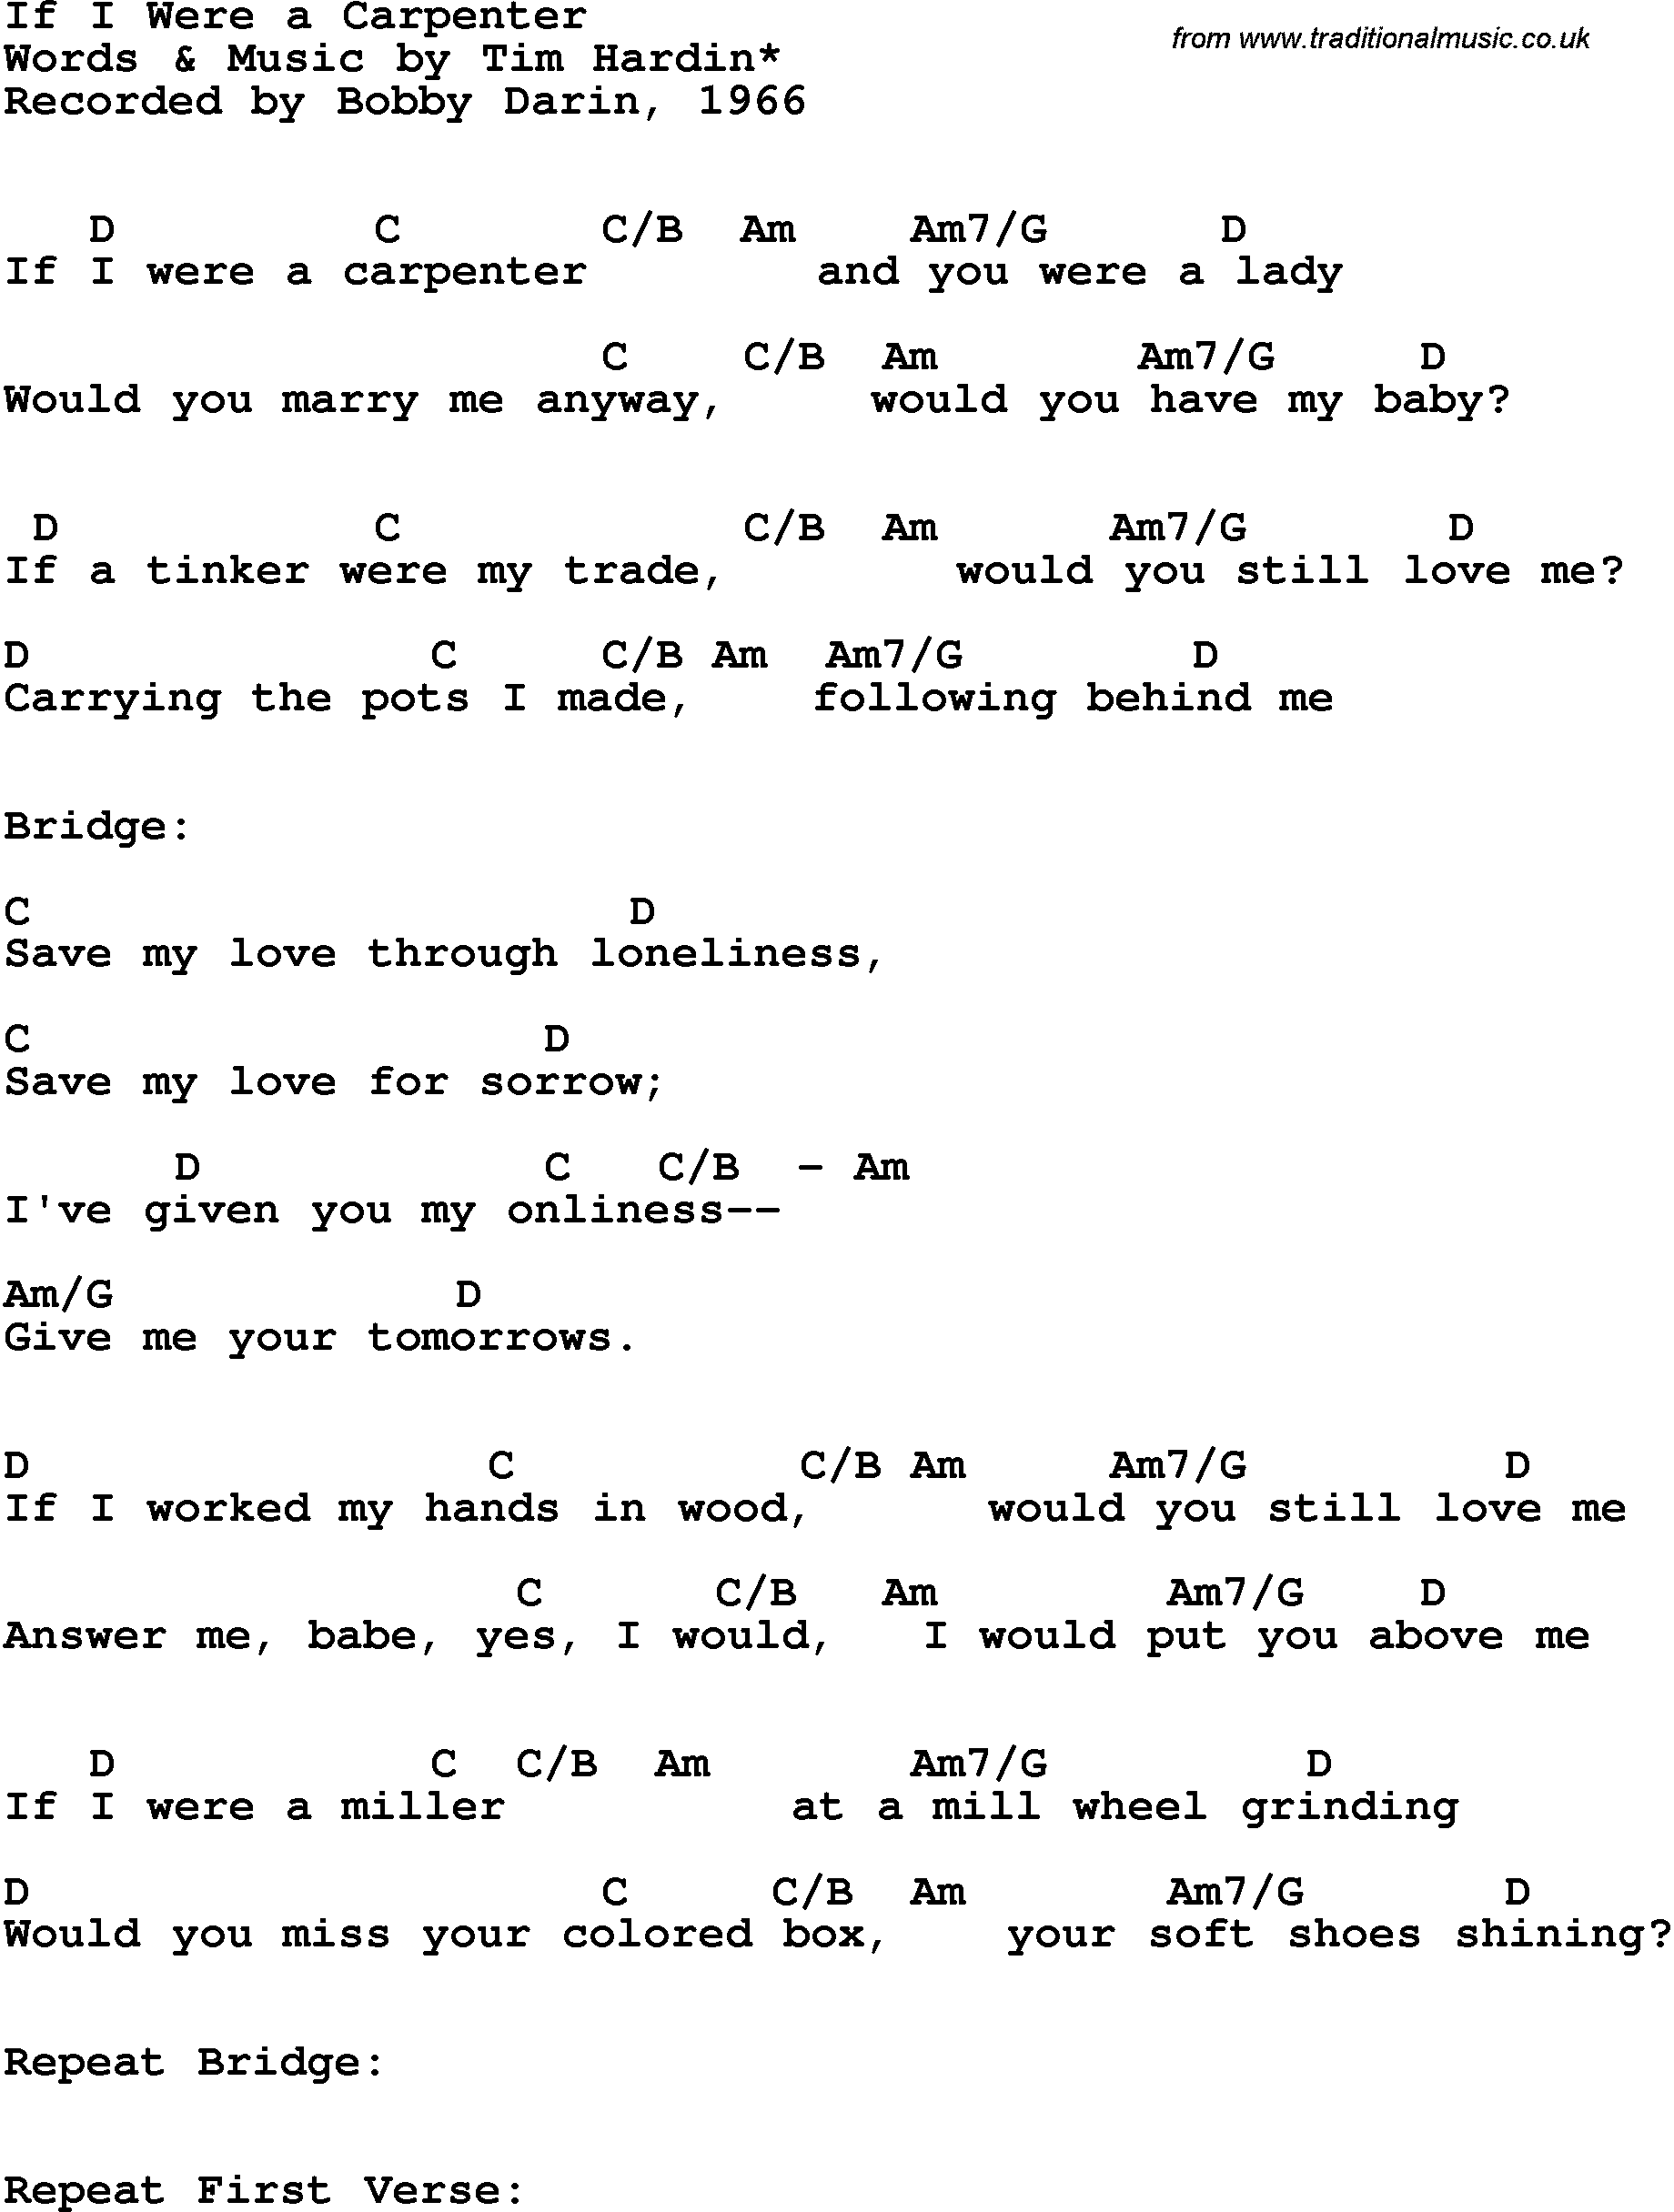 Song Lyrics with guitar chords for If I Were A Carpenter - Bobby Darin, 1966